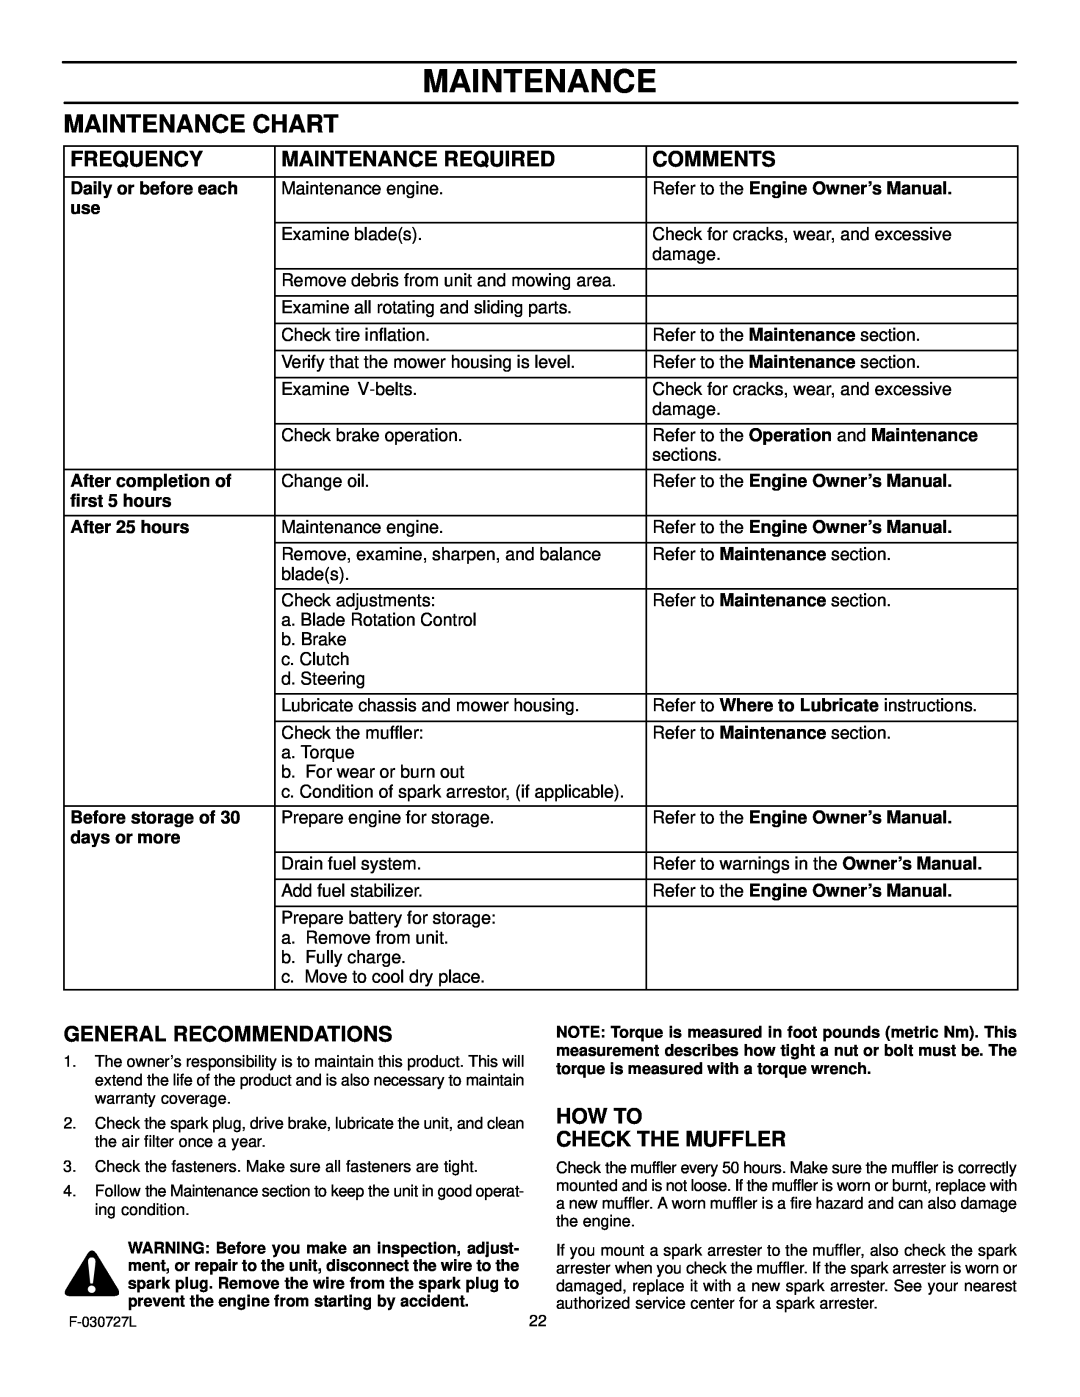 Murray 465600x8A manual Maintenance Chart, Frequency, Maintenance Required, Comments, General Recommendations 